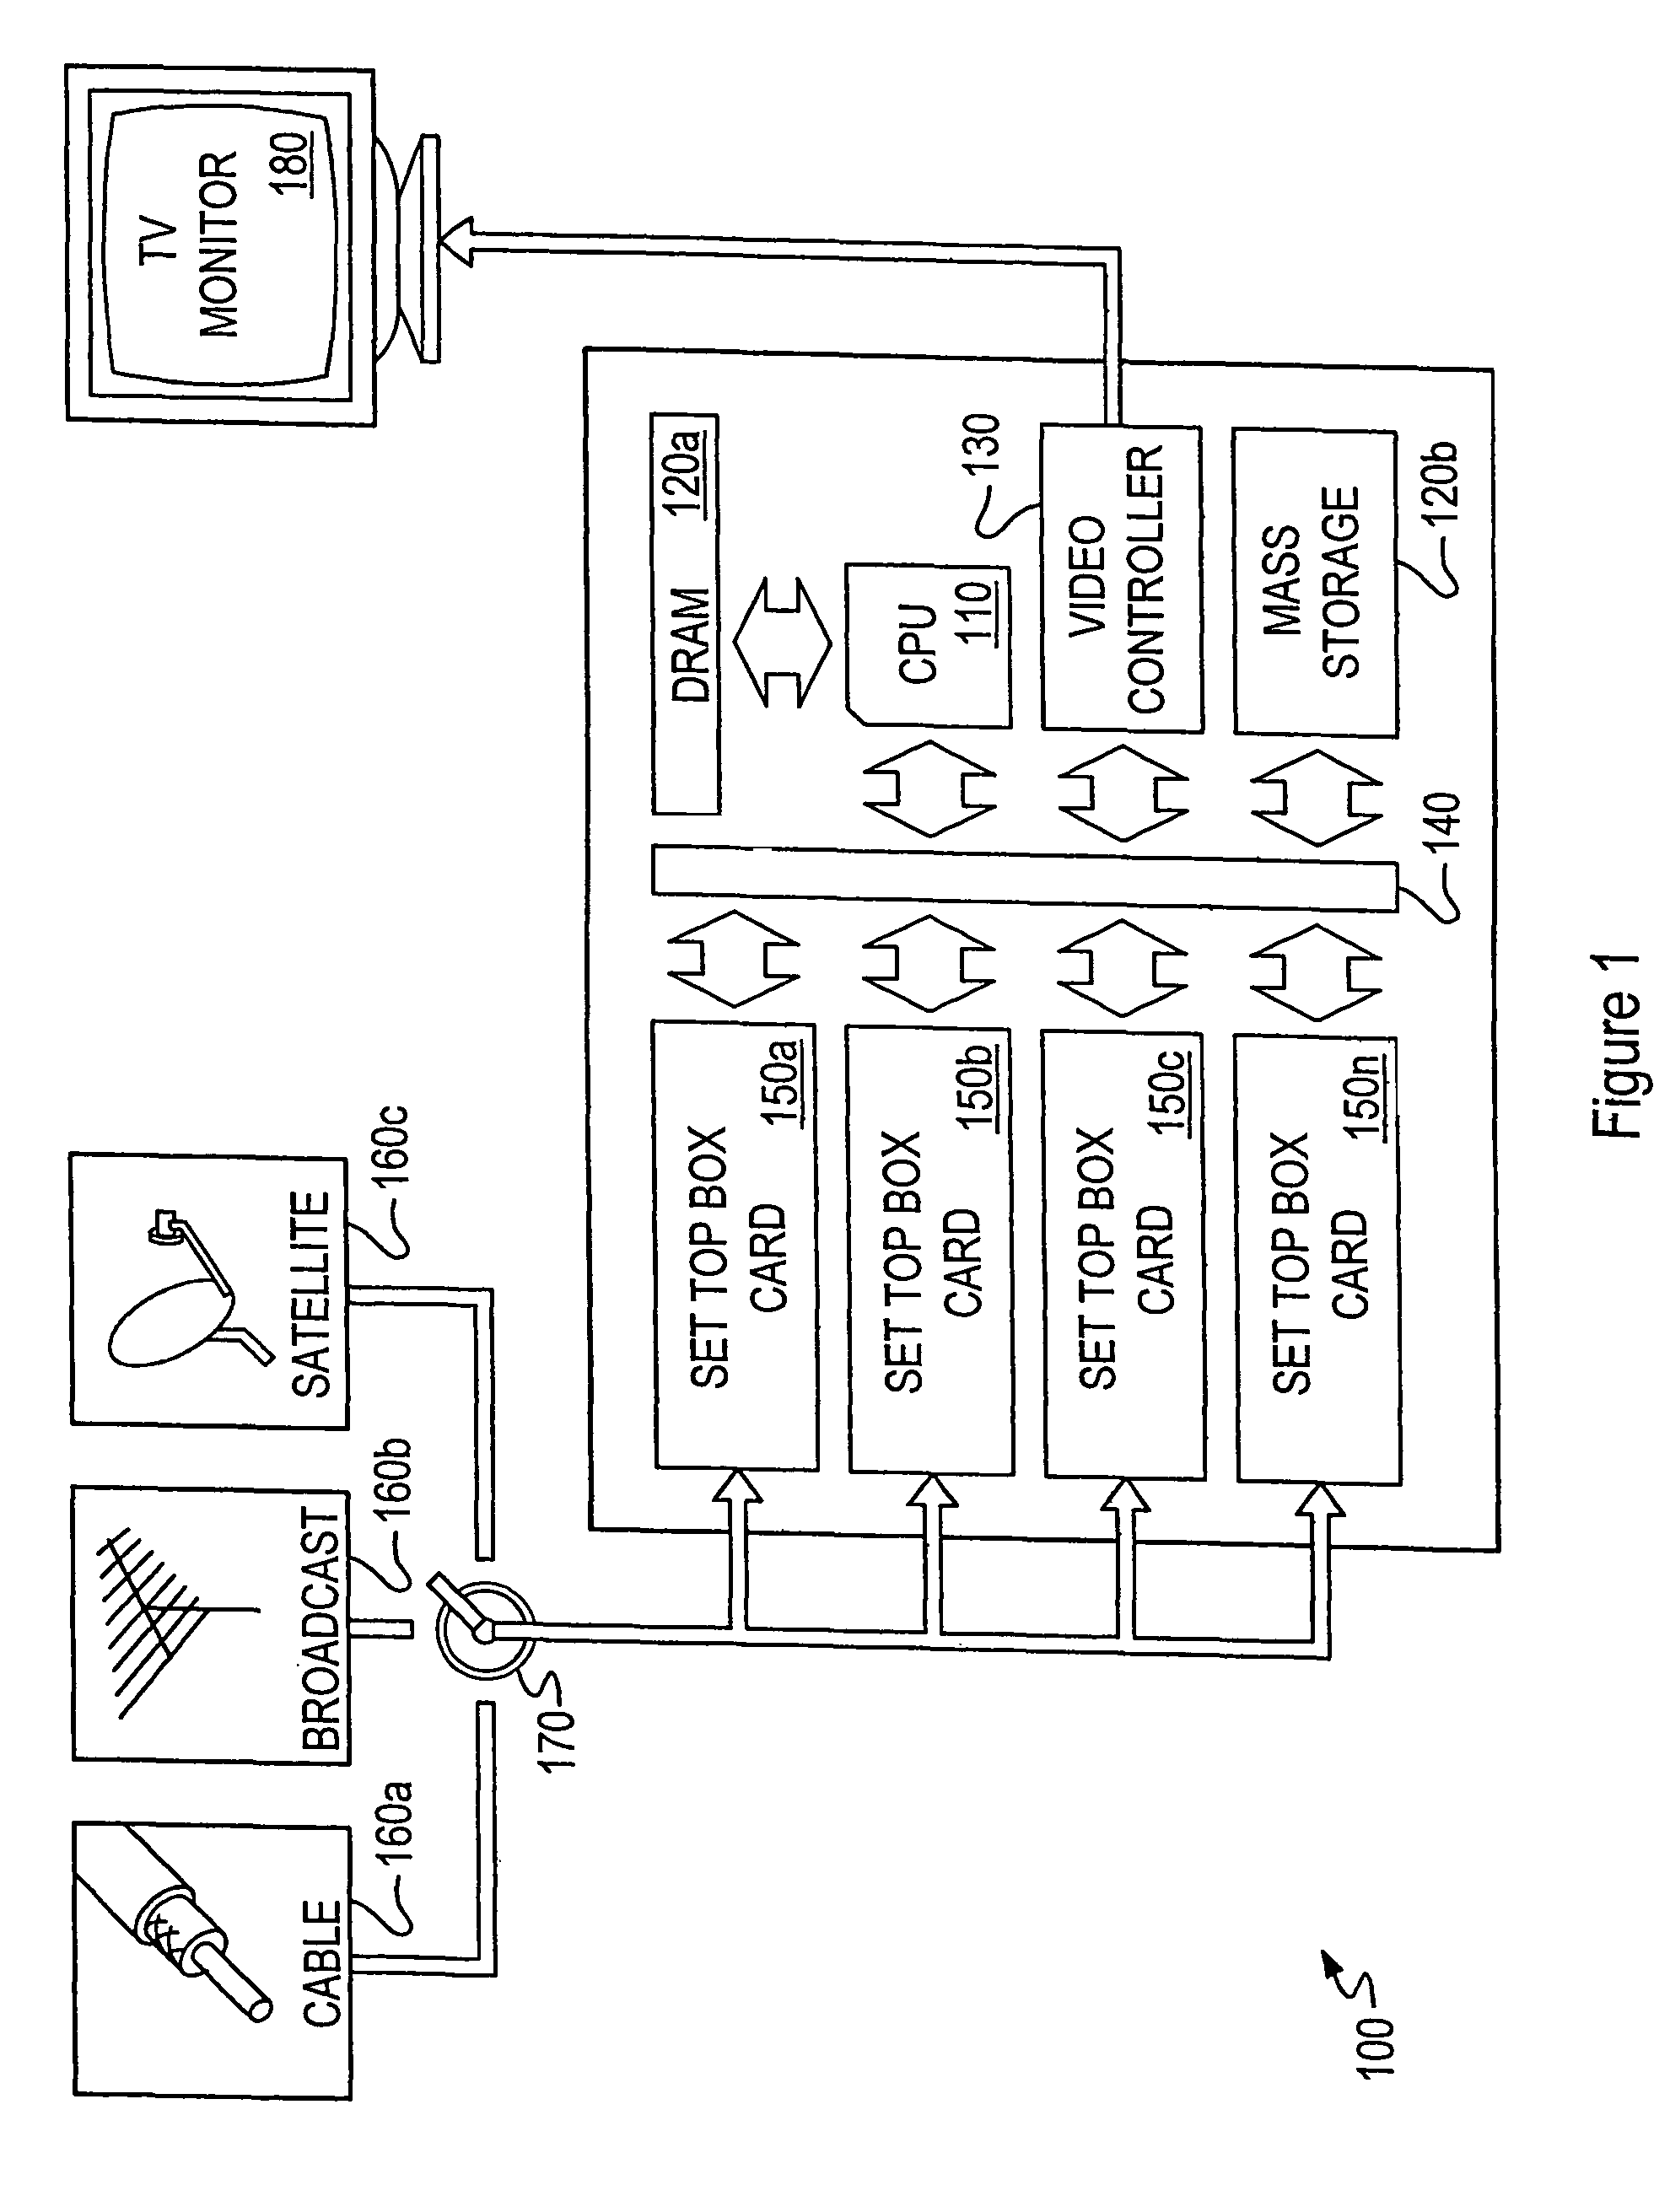 Systems and methods for storing a plurality of video streams on re-writable random-access media and time- and channel-based retrieval thereof